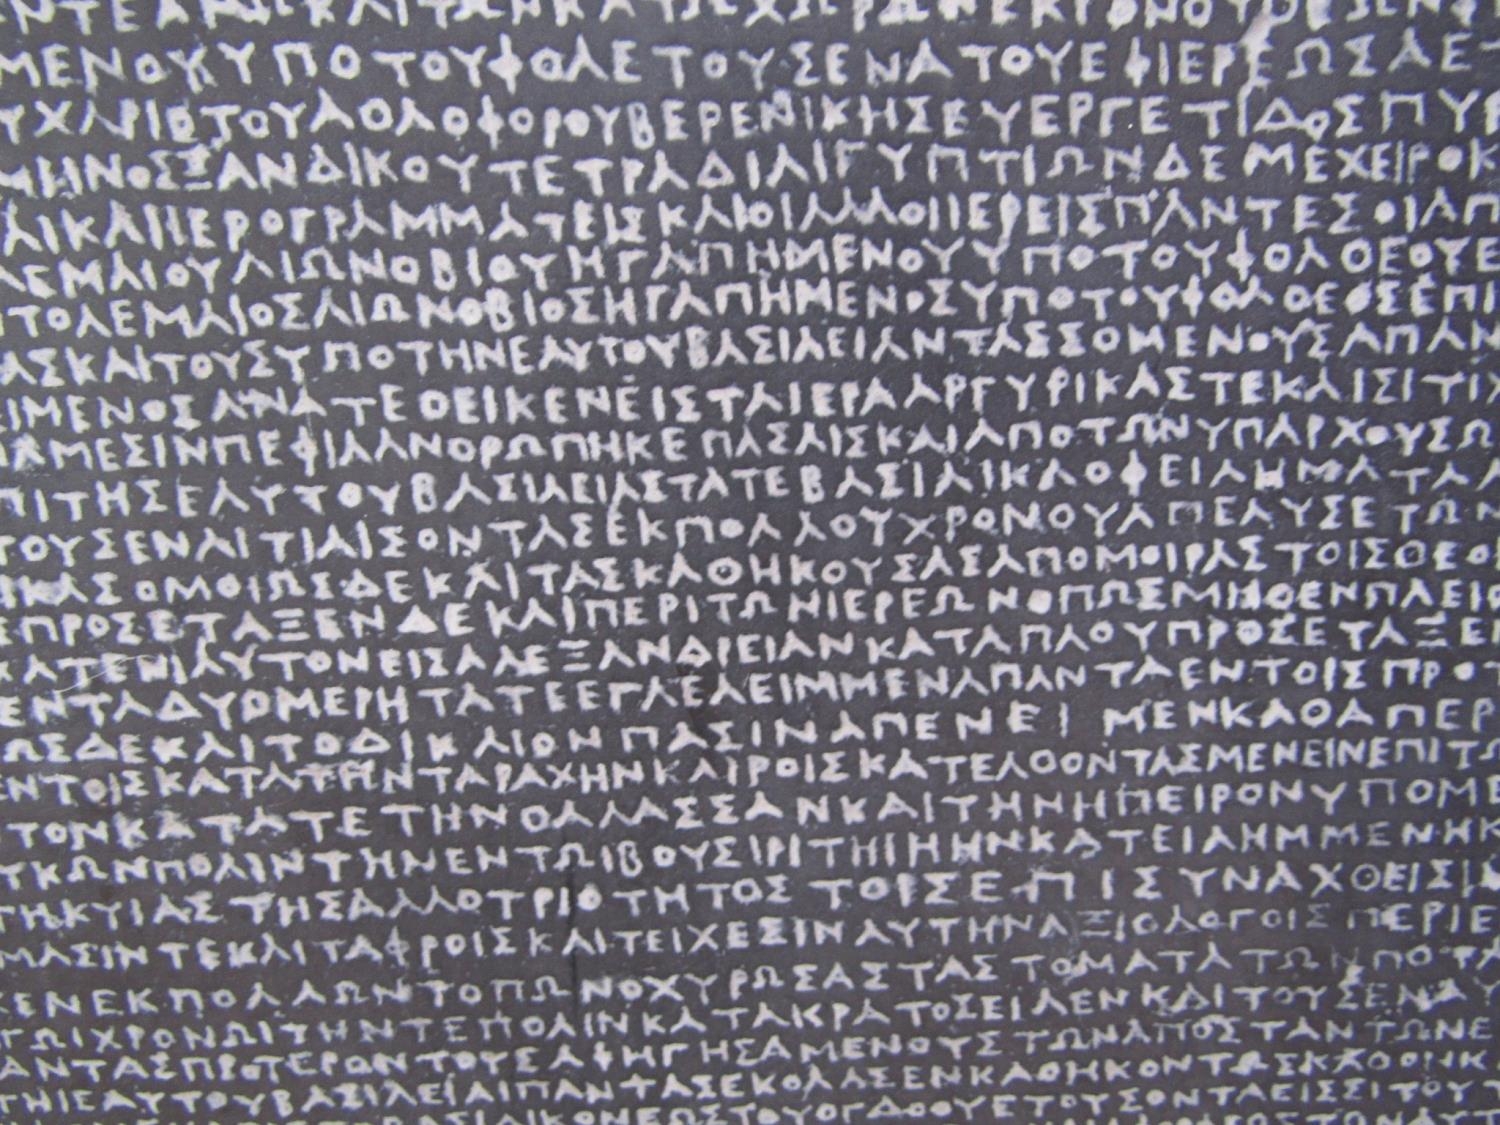 Glass fibre copy of the Rosetta stone showing Egyptian Hieroglyphics Demotic script and Greek - Image 3 of 4